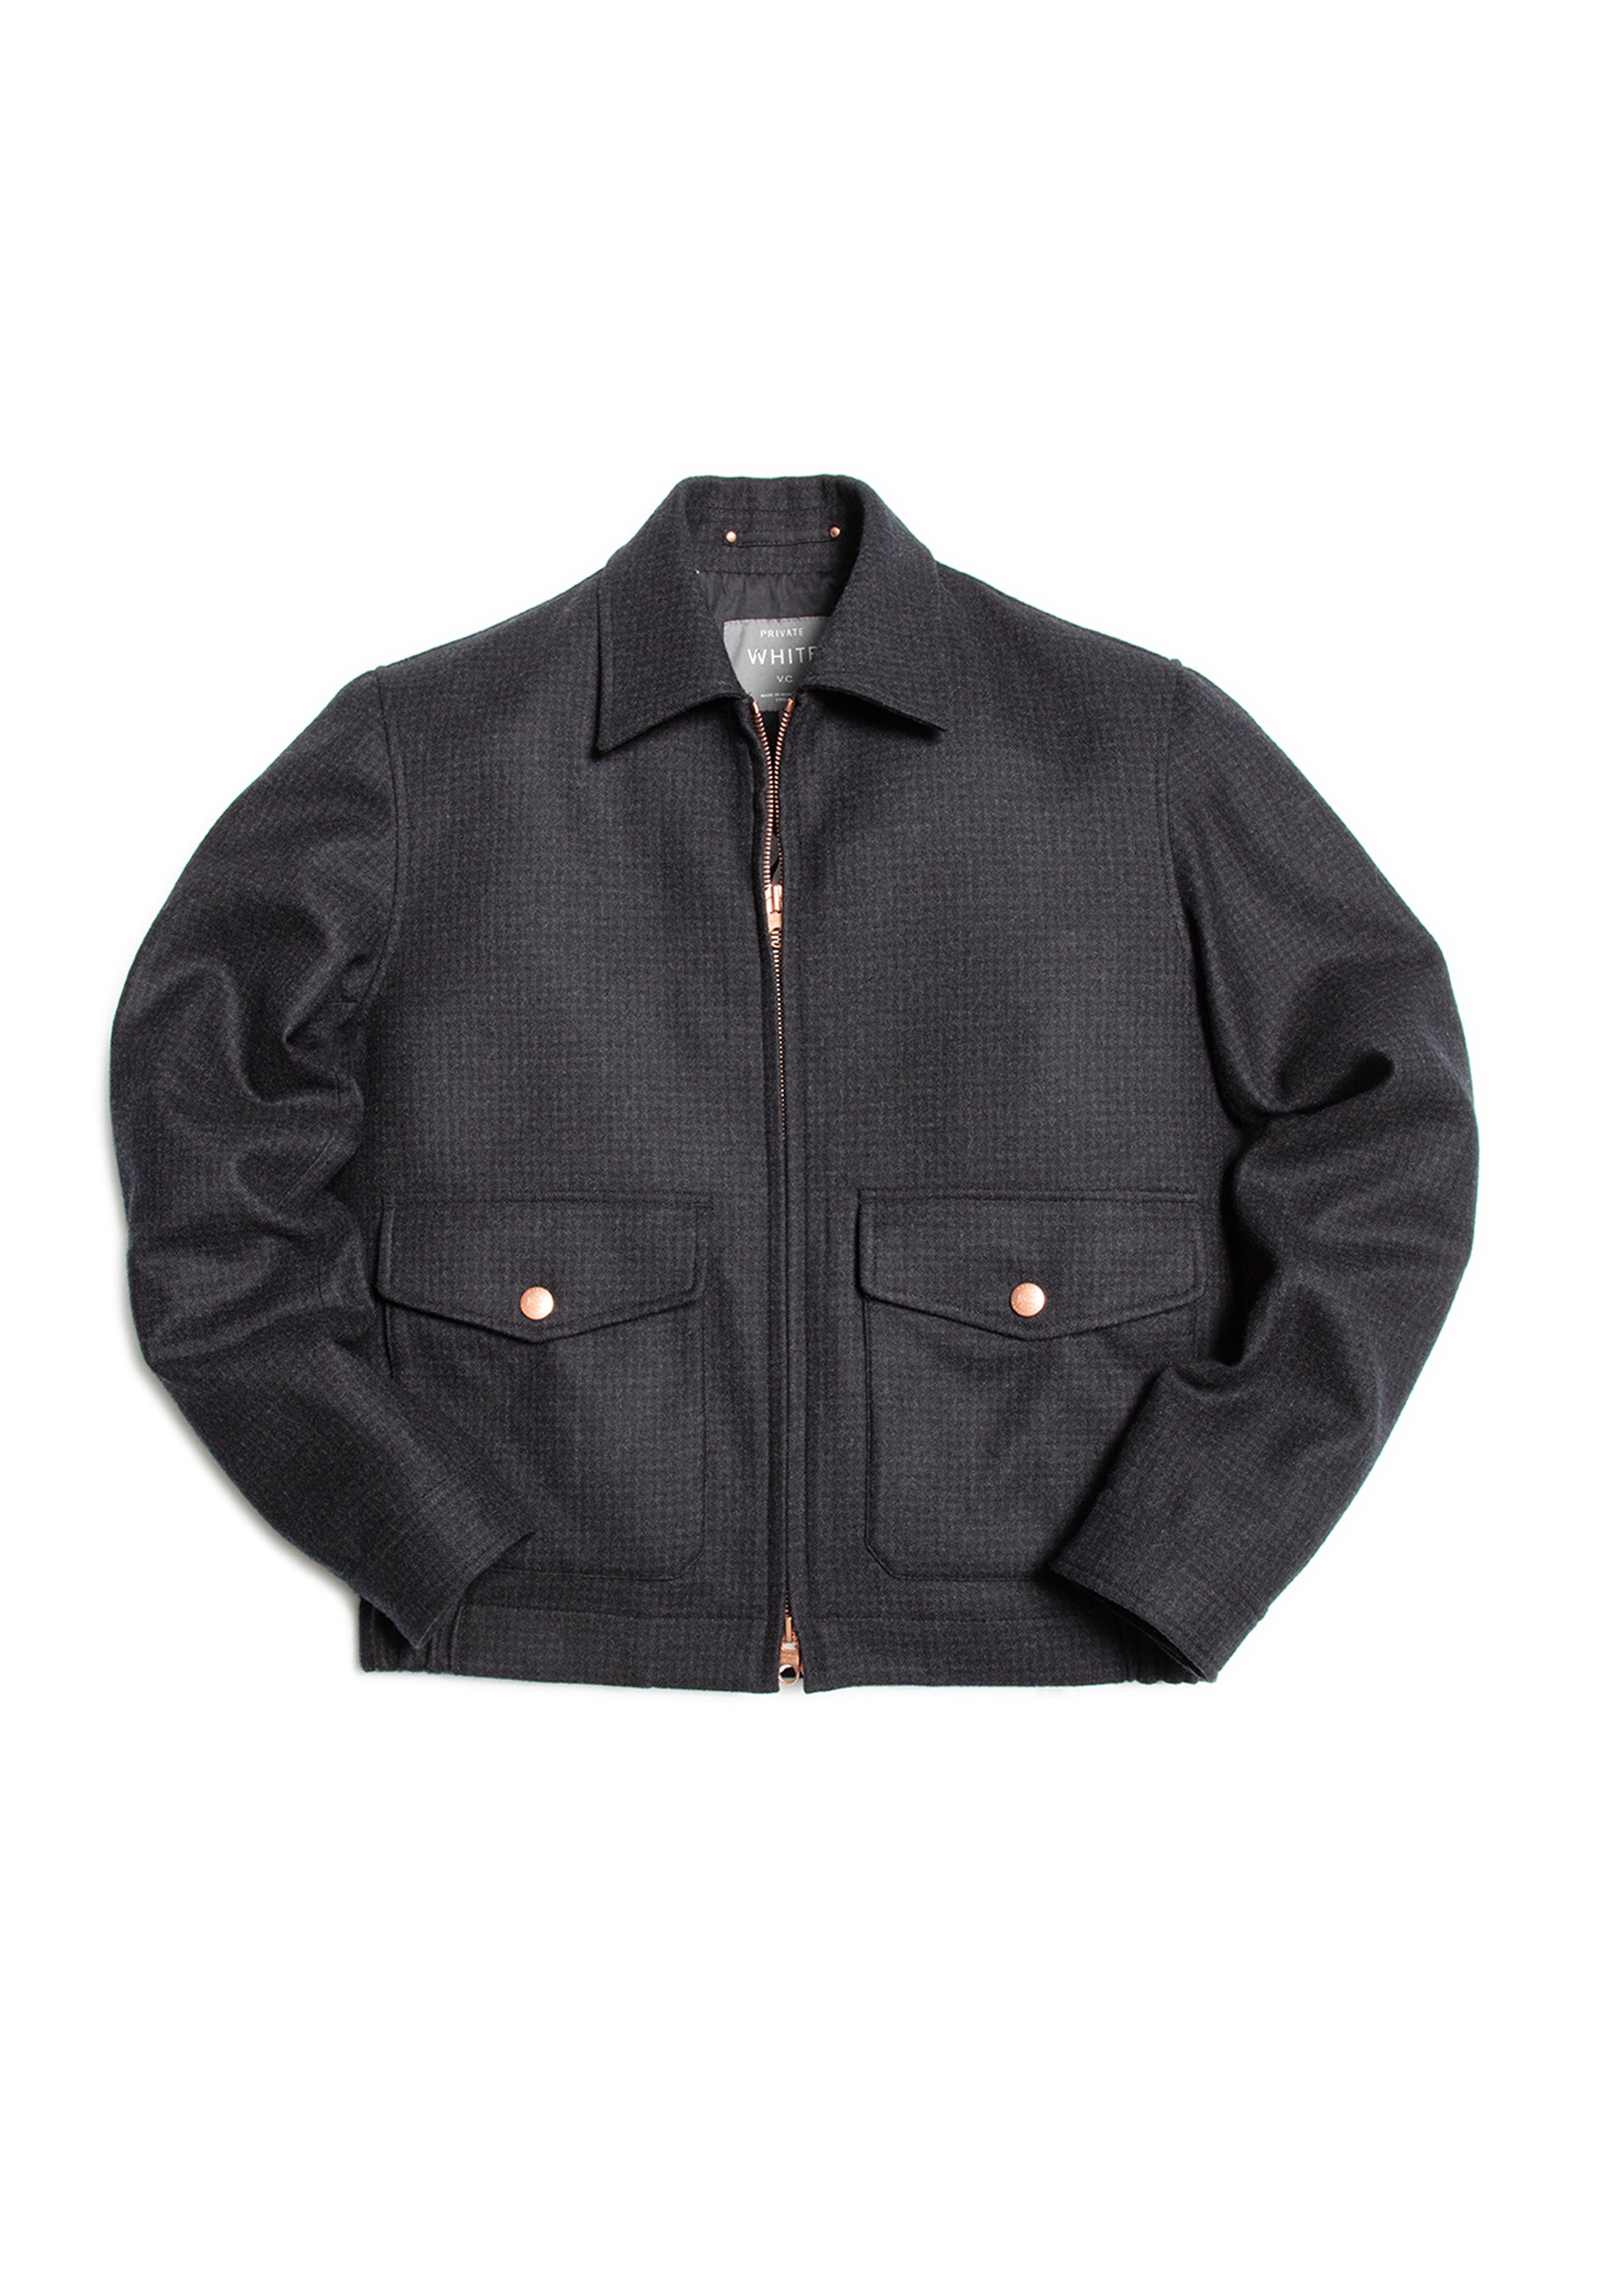 Introducing: The new Reversible Suede Bomber – Permanent Style